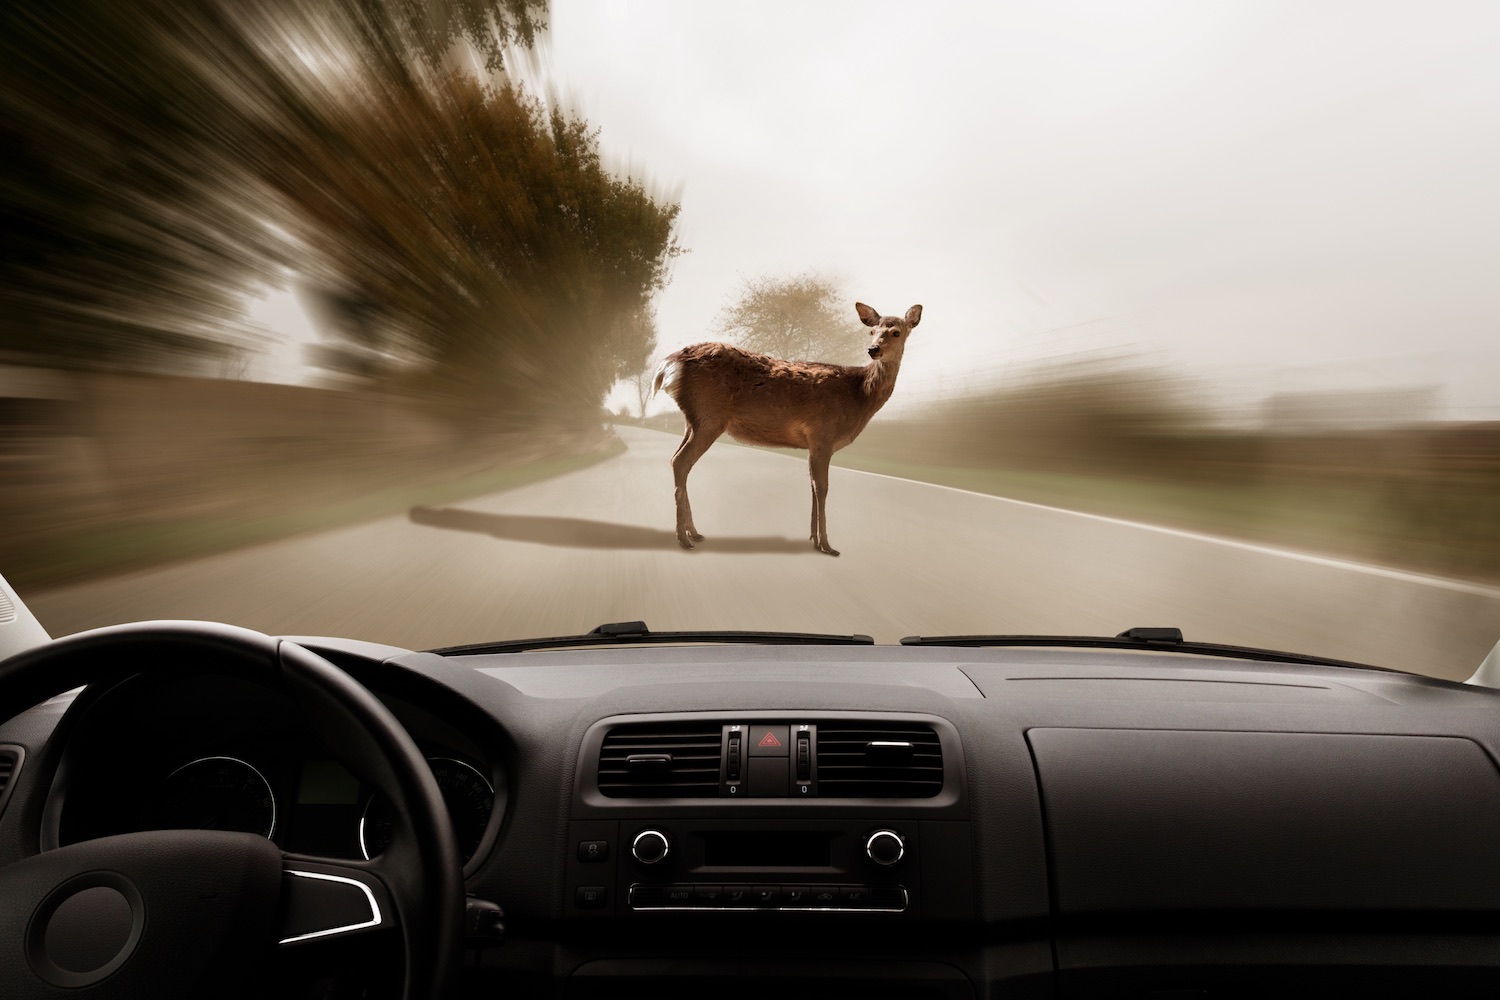 Encountering Wildlife on Your Summer Road Trip: How to Drive Safely